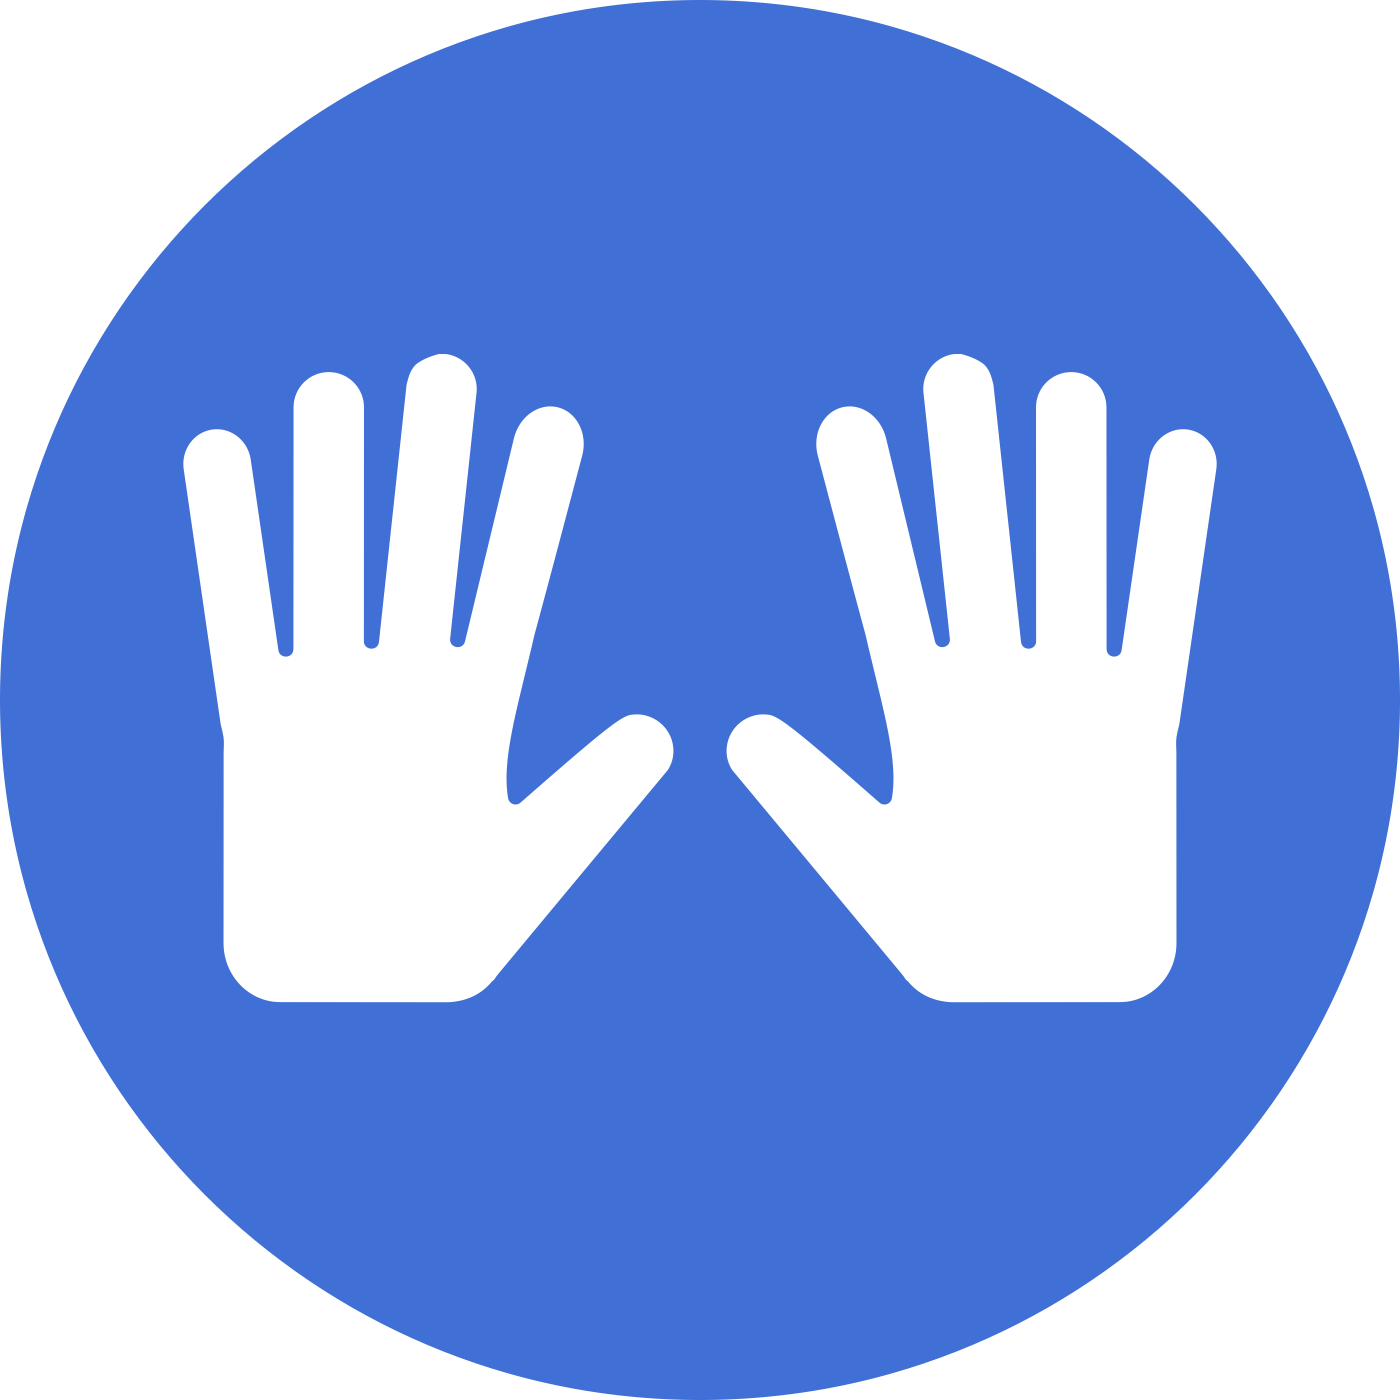 Two hands held up to indicate a secure status.